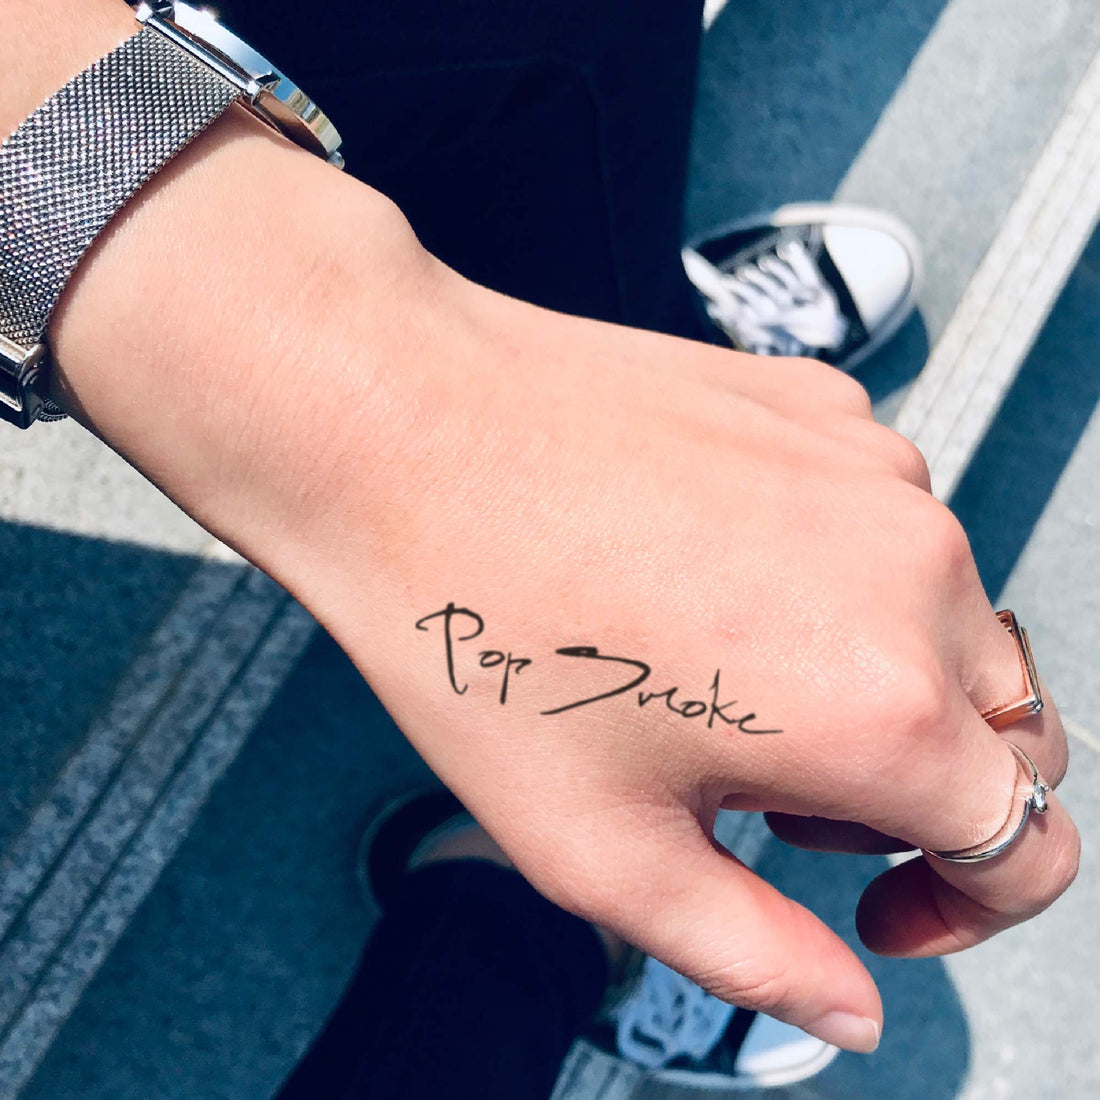 Pop Smoke custom temporary tattoo sticker design idea inspiration meanings removal arm wrist hand words font name signature calligraphy lyrics tour concert outfits merch accessory gift souvenir costumes wear dress up code